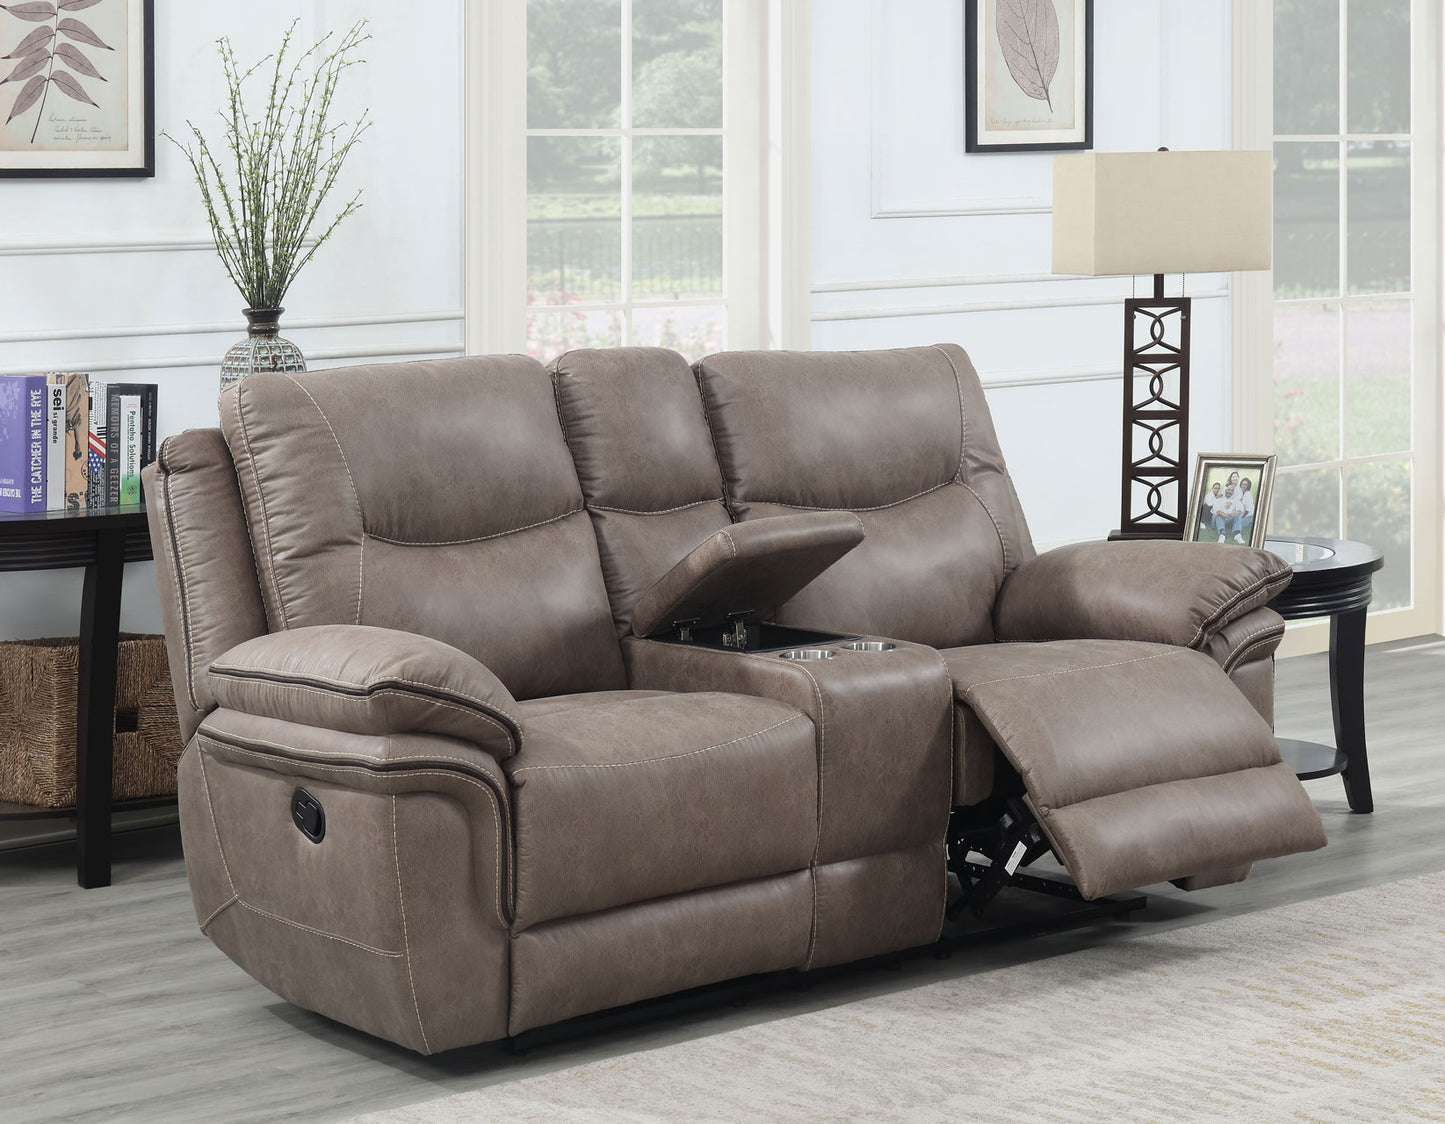 Isabella Manual Reclining Console Loveseat, Sand